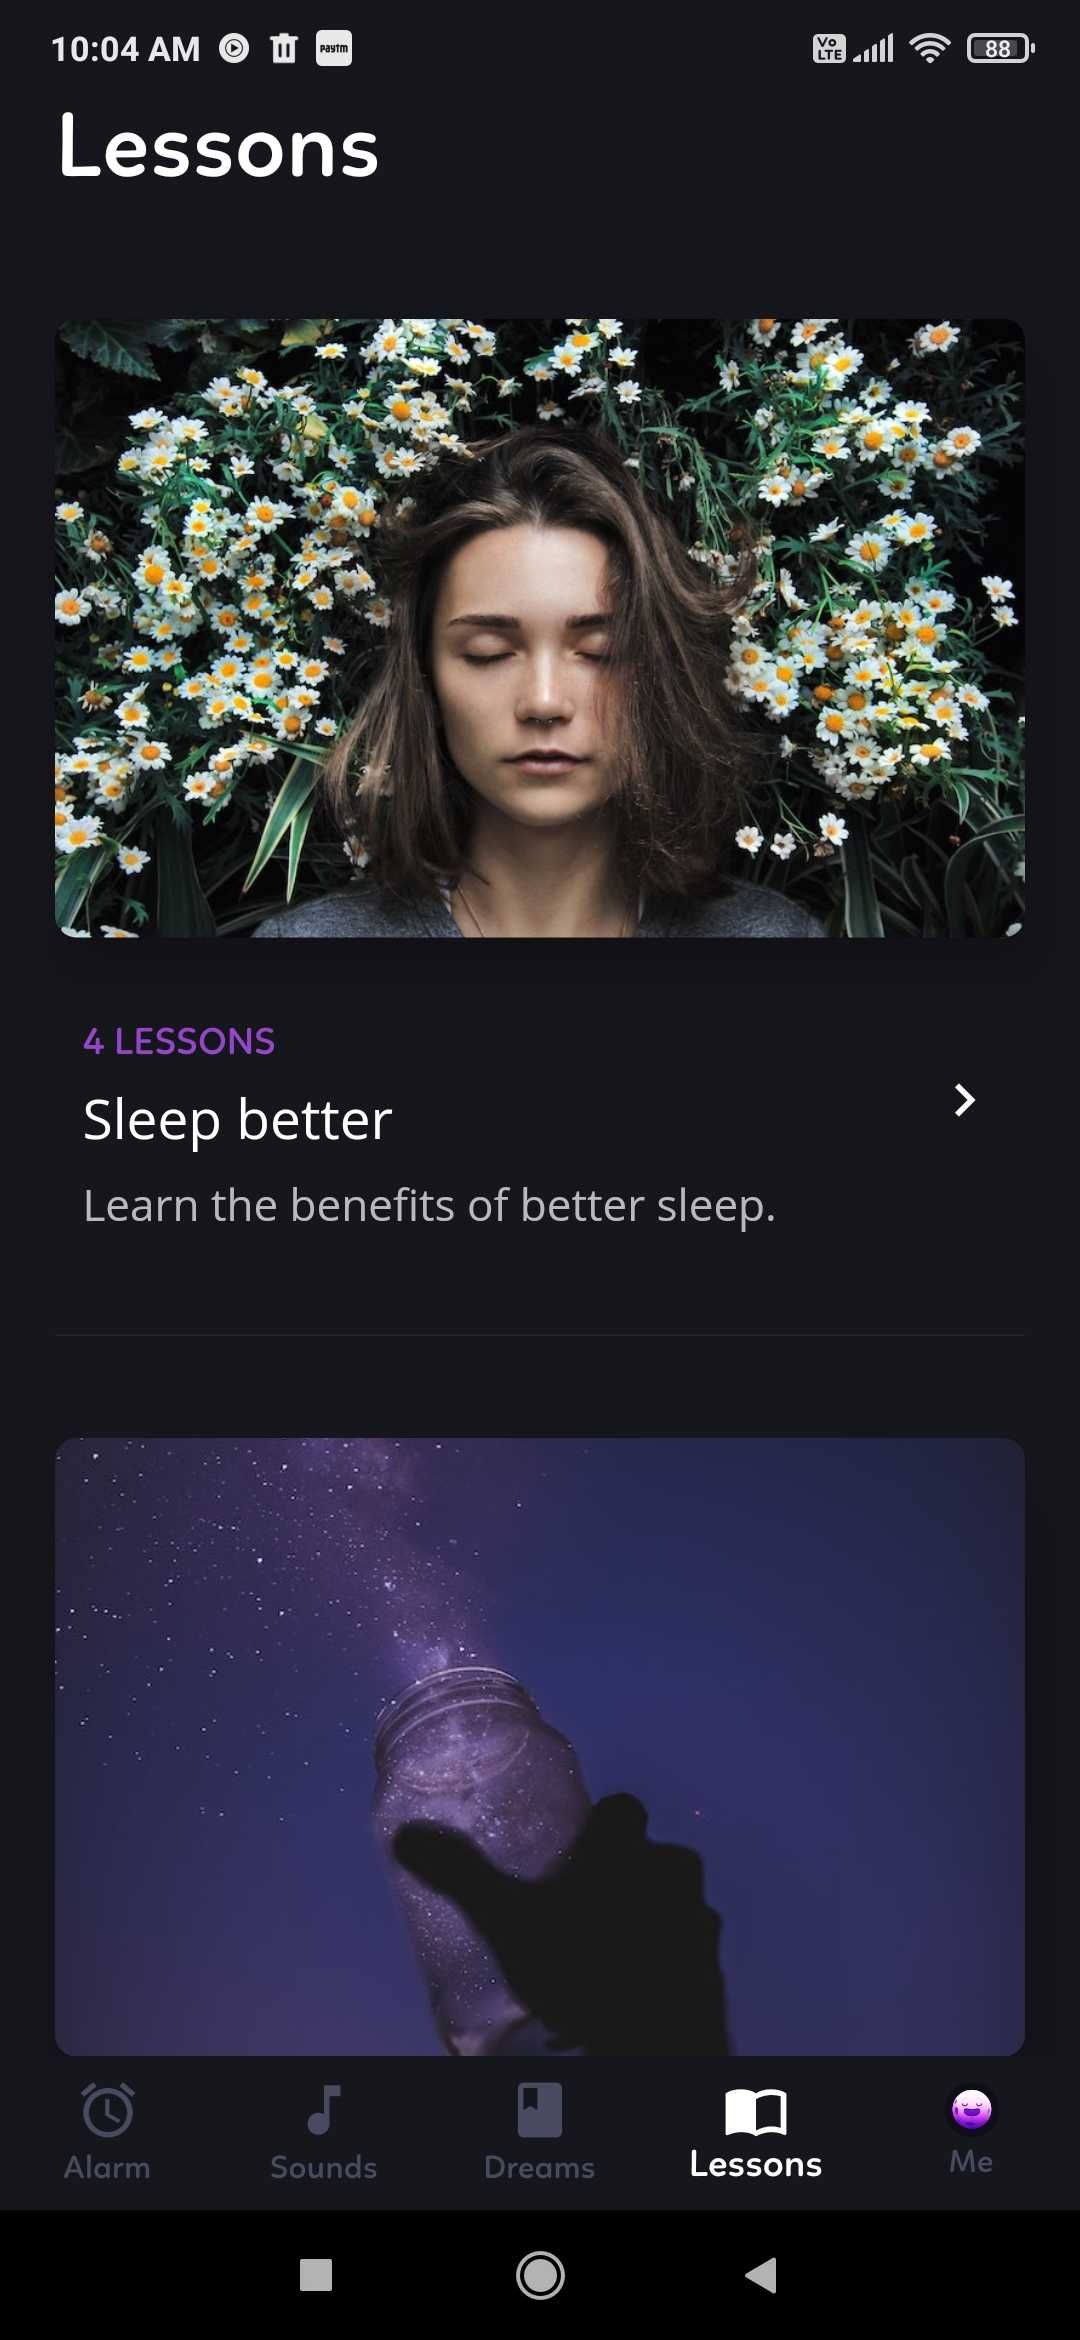 Dreams teaches you the basics of sleep and dreaming through small lessons